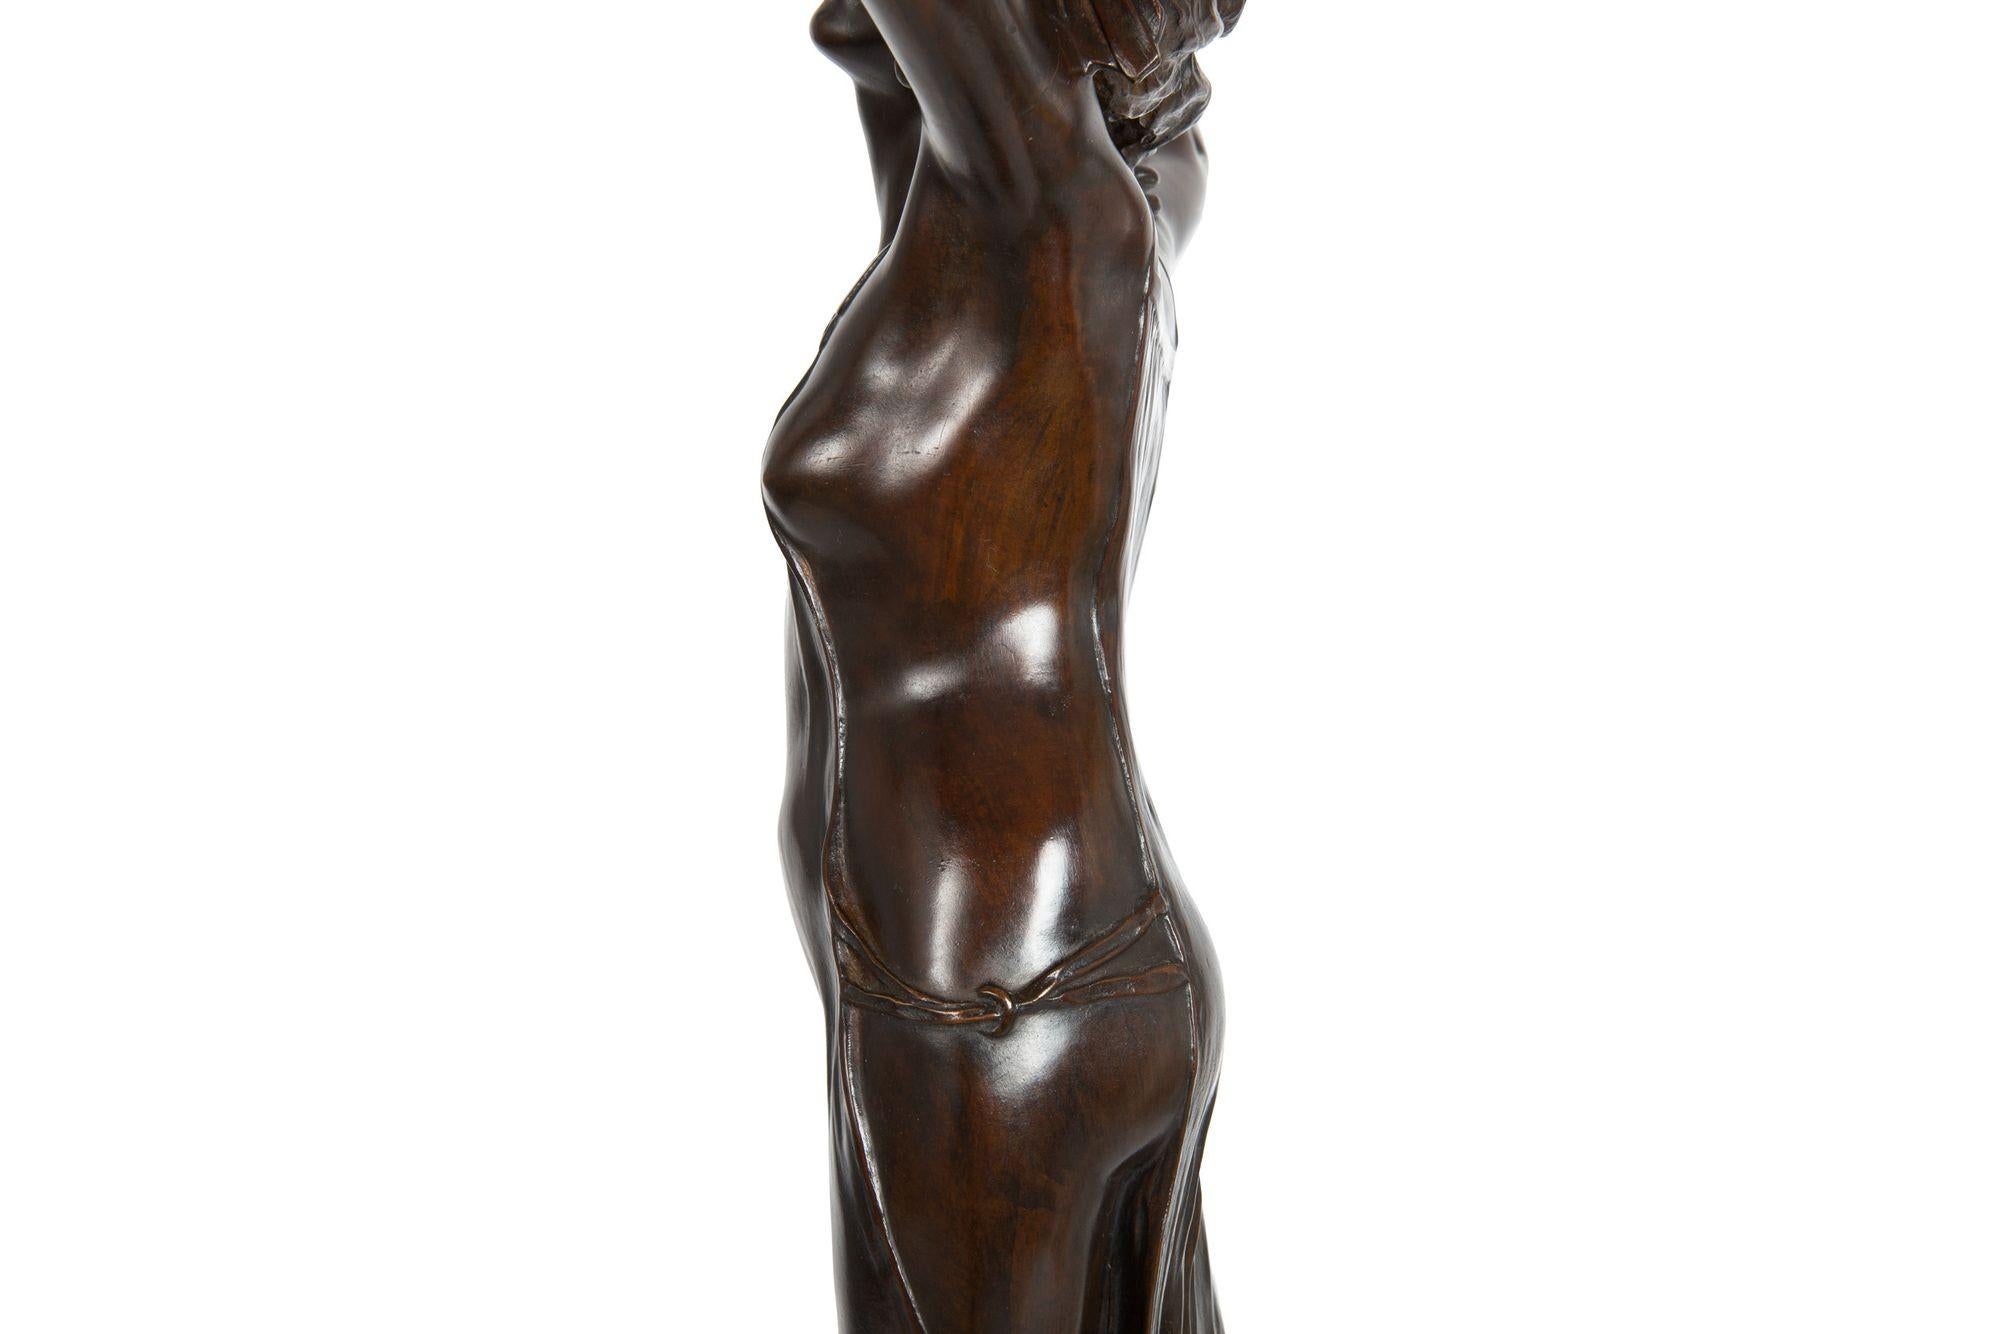 Rare Art Nouveau French Bronze Sculpture “Ariadne” by Georges Flamand 9